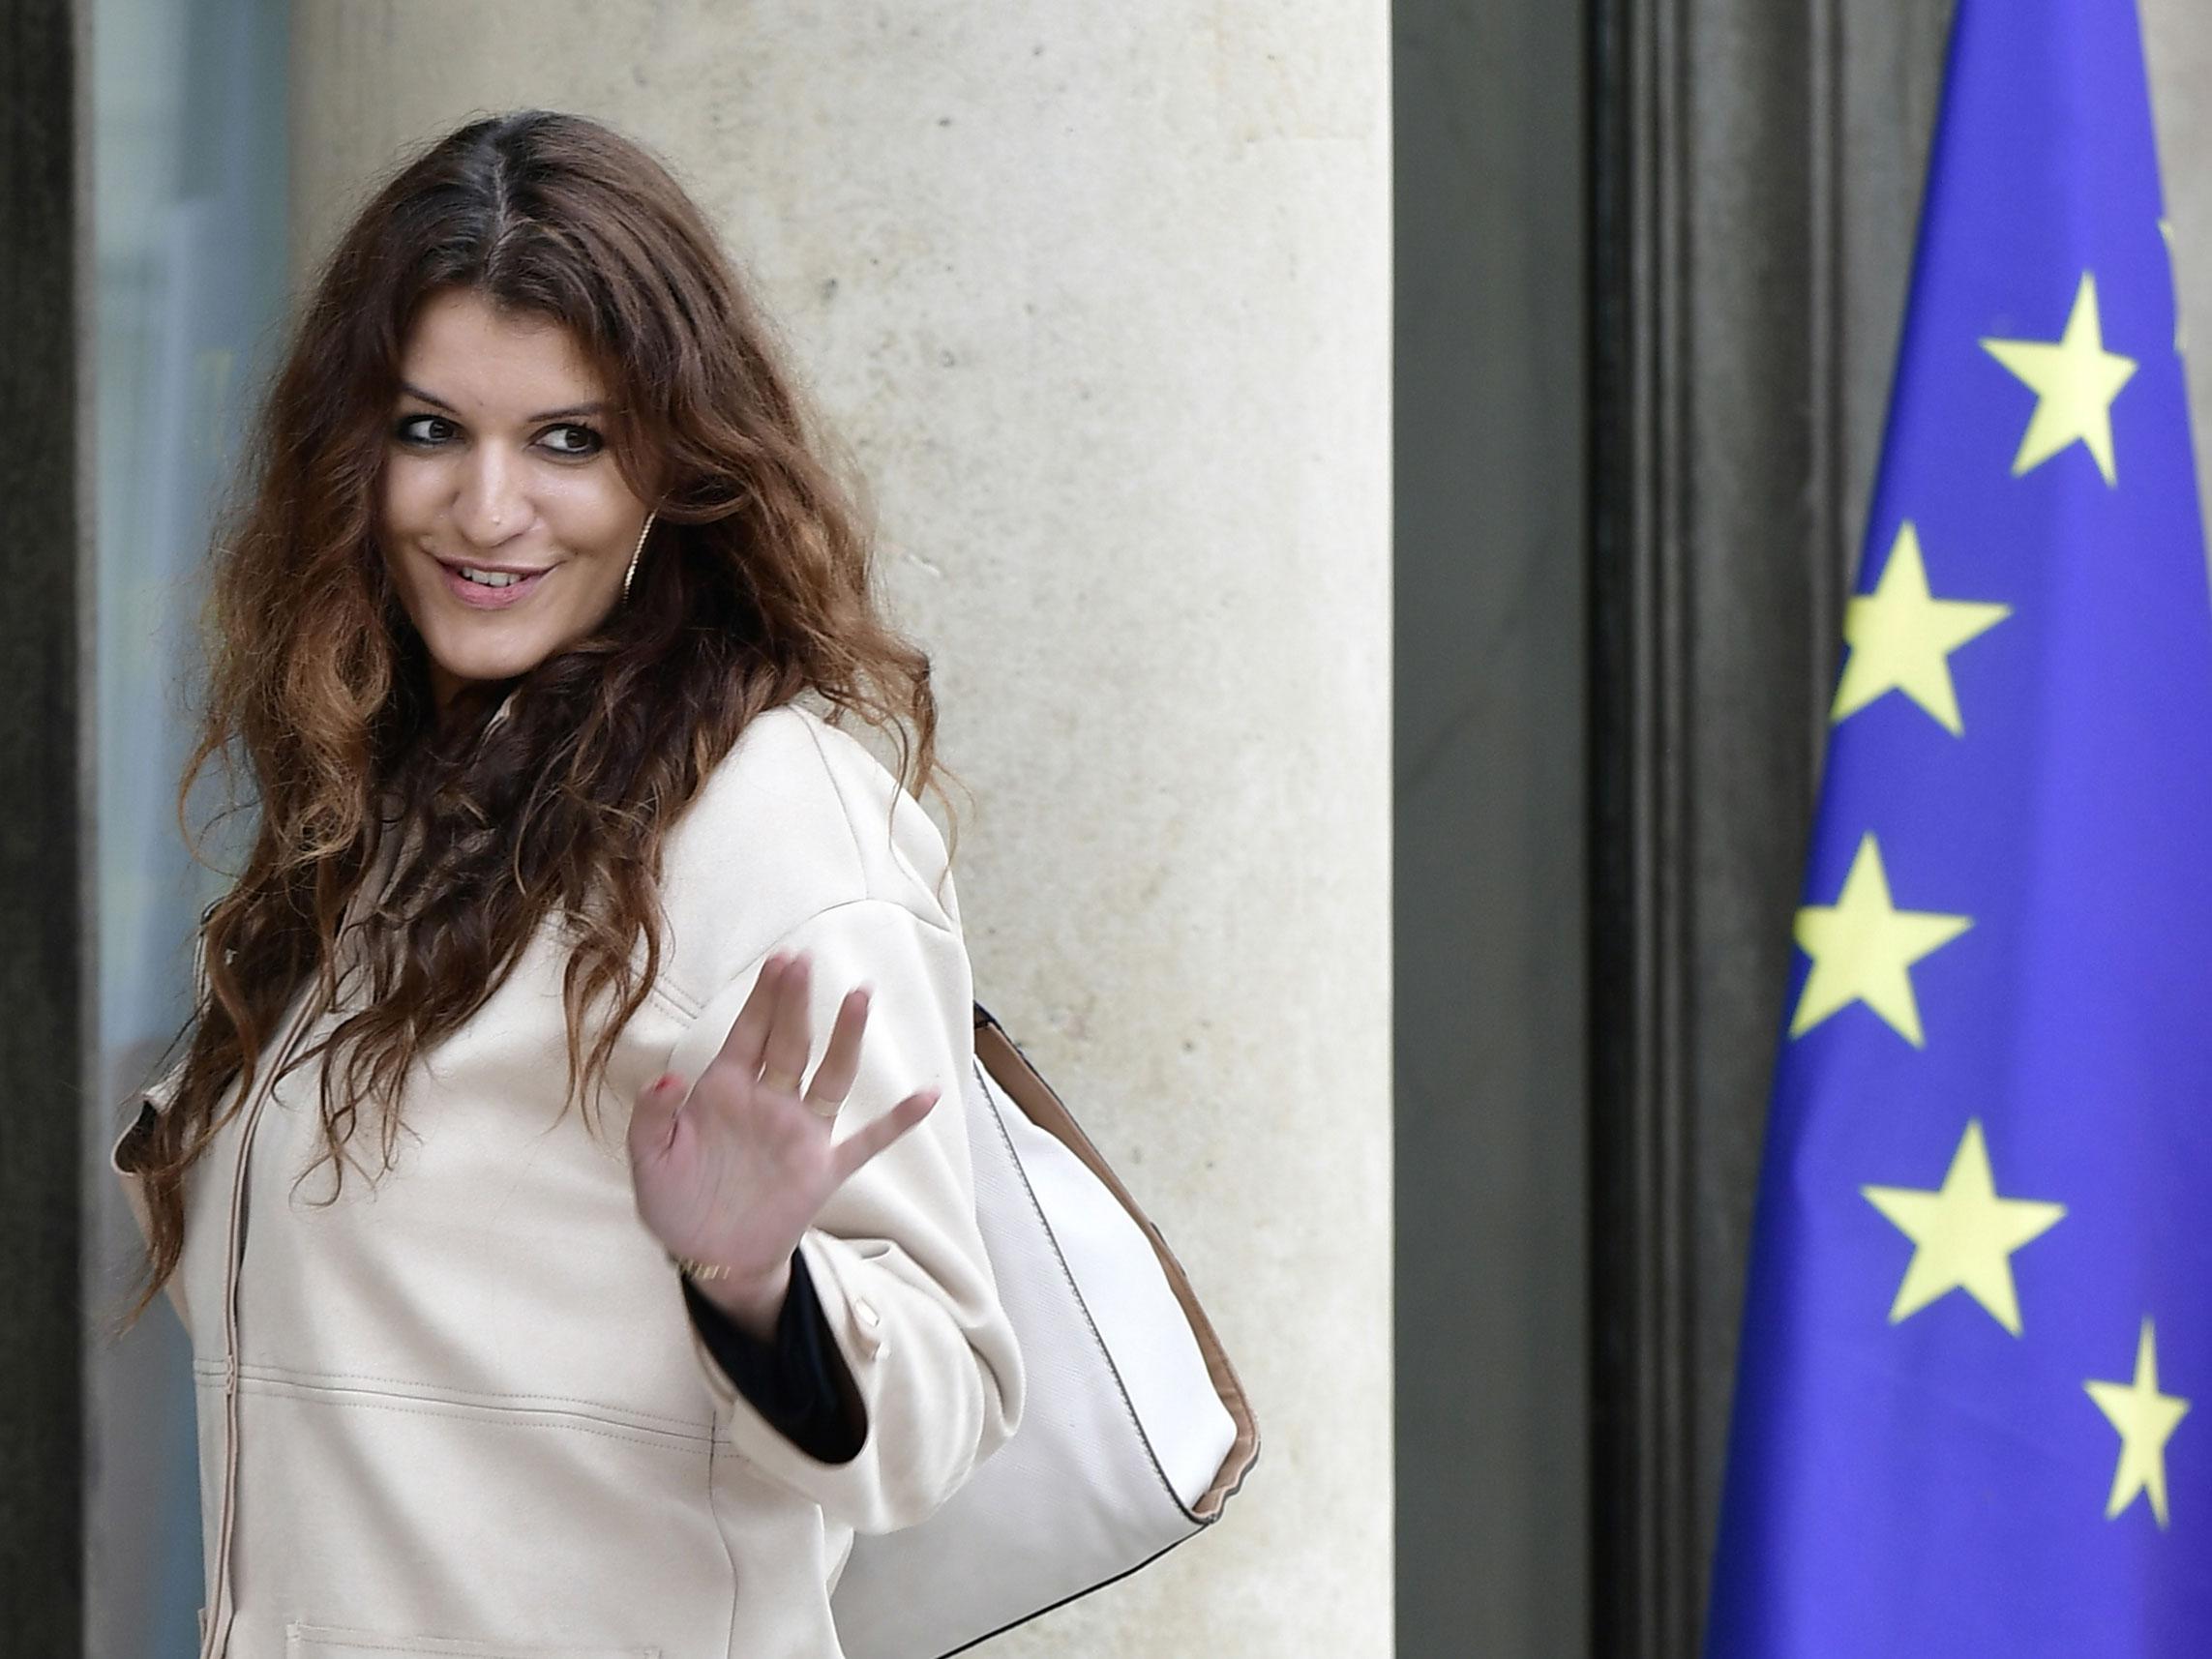 Marlene Schiappa, French minister for gender equality, is the heading the campaign against sexual harassment on the country's streets